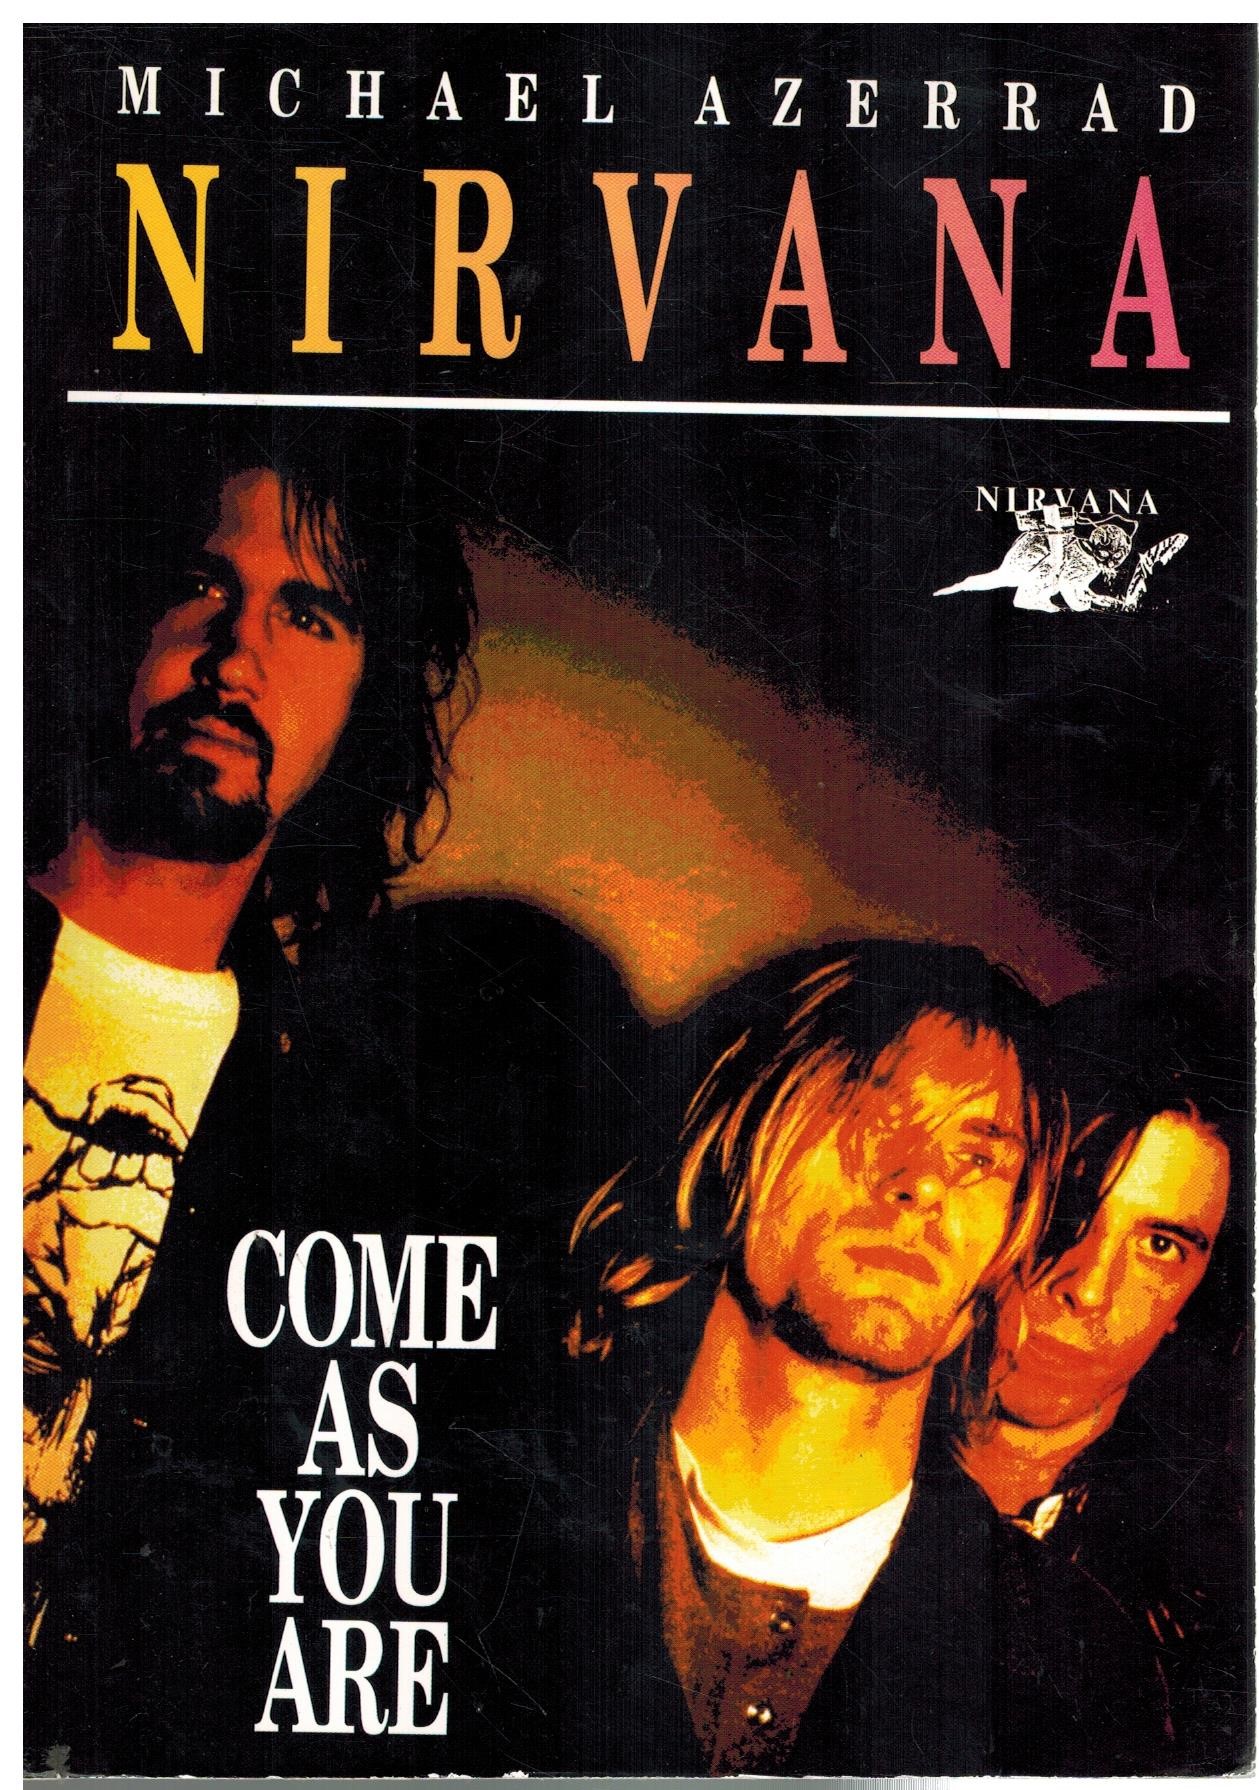 NIRVANA-COME AS YOU ARE